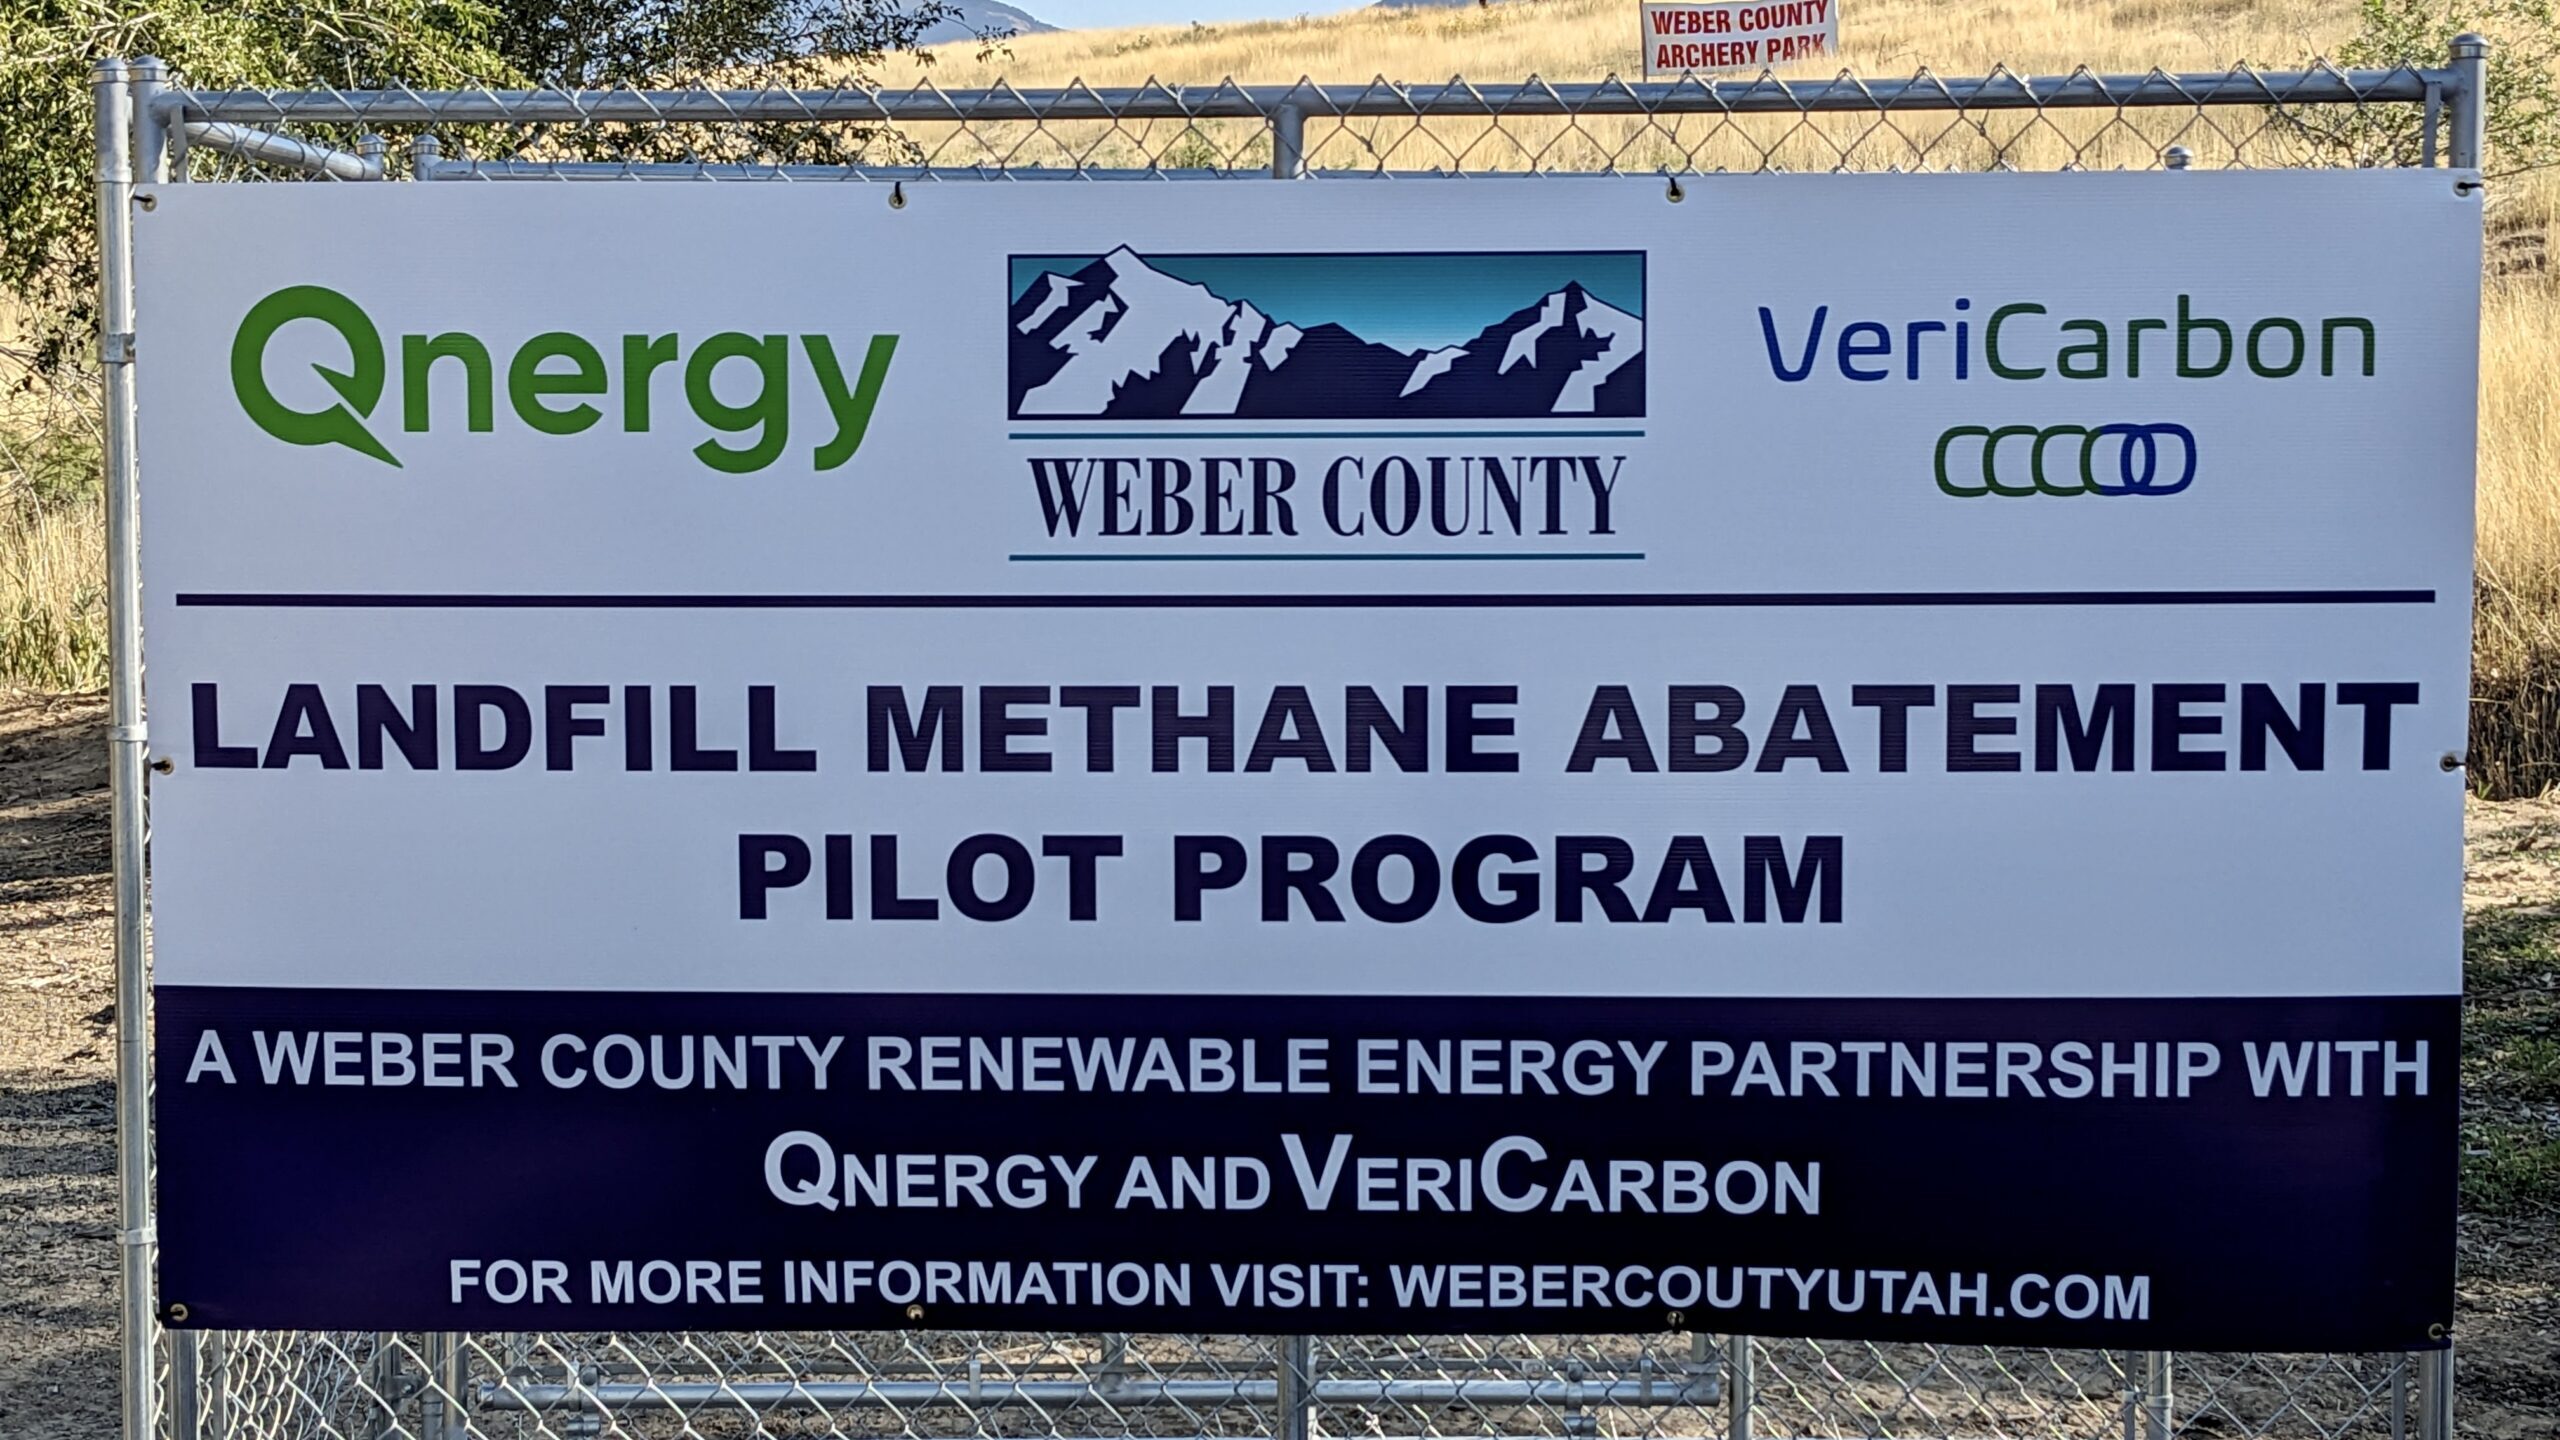 Weber county partners with Qnergy to turn methane emissions from closed landfills into energy....